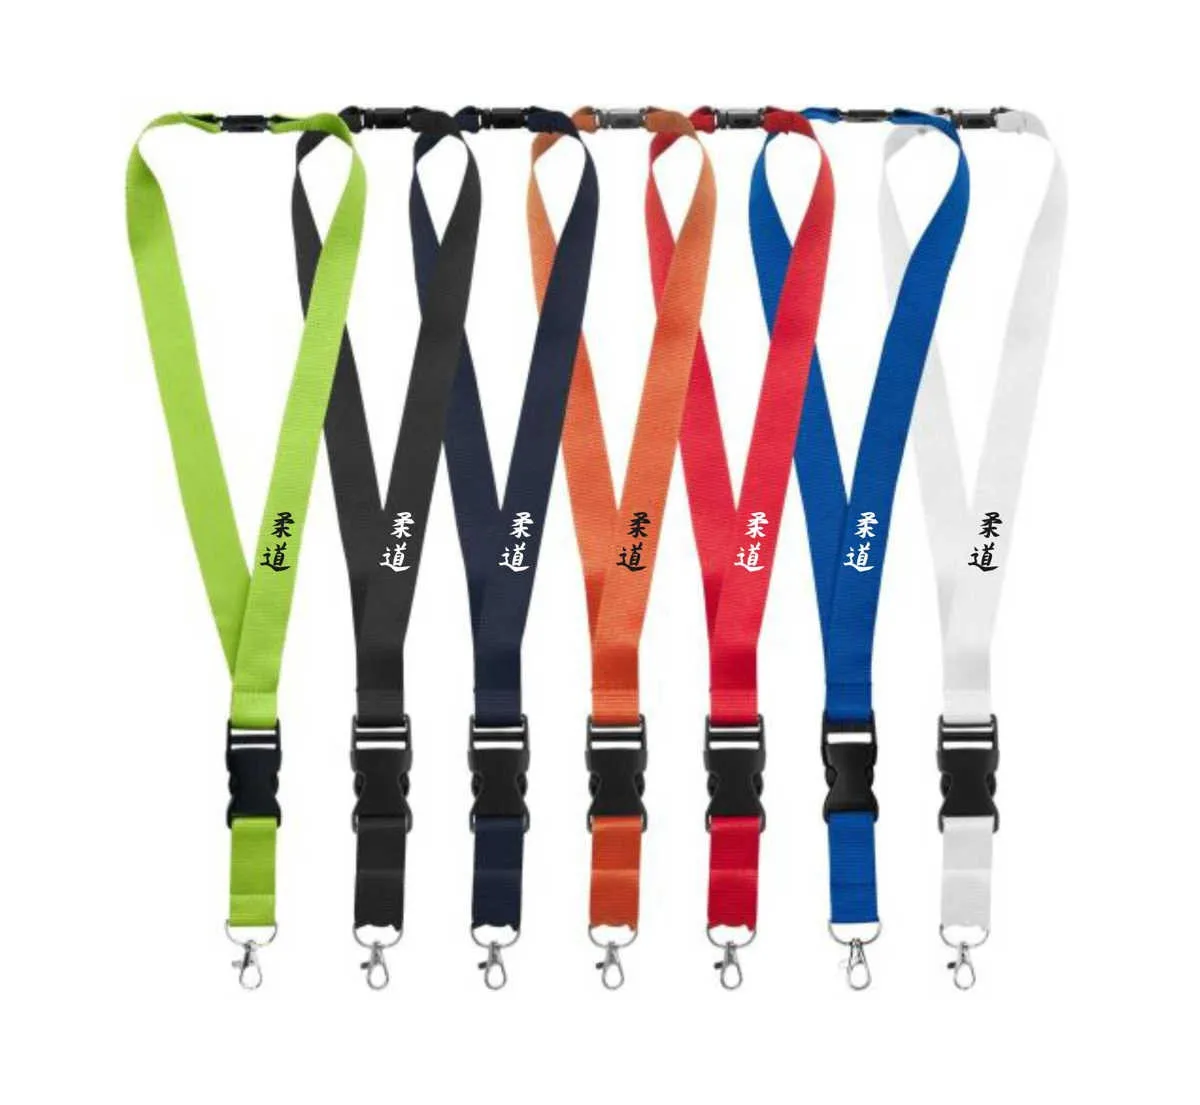 Lanyard with Judo characters